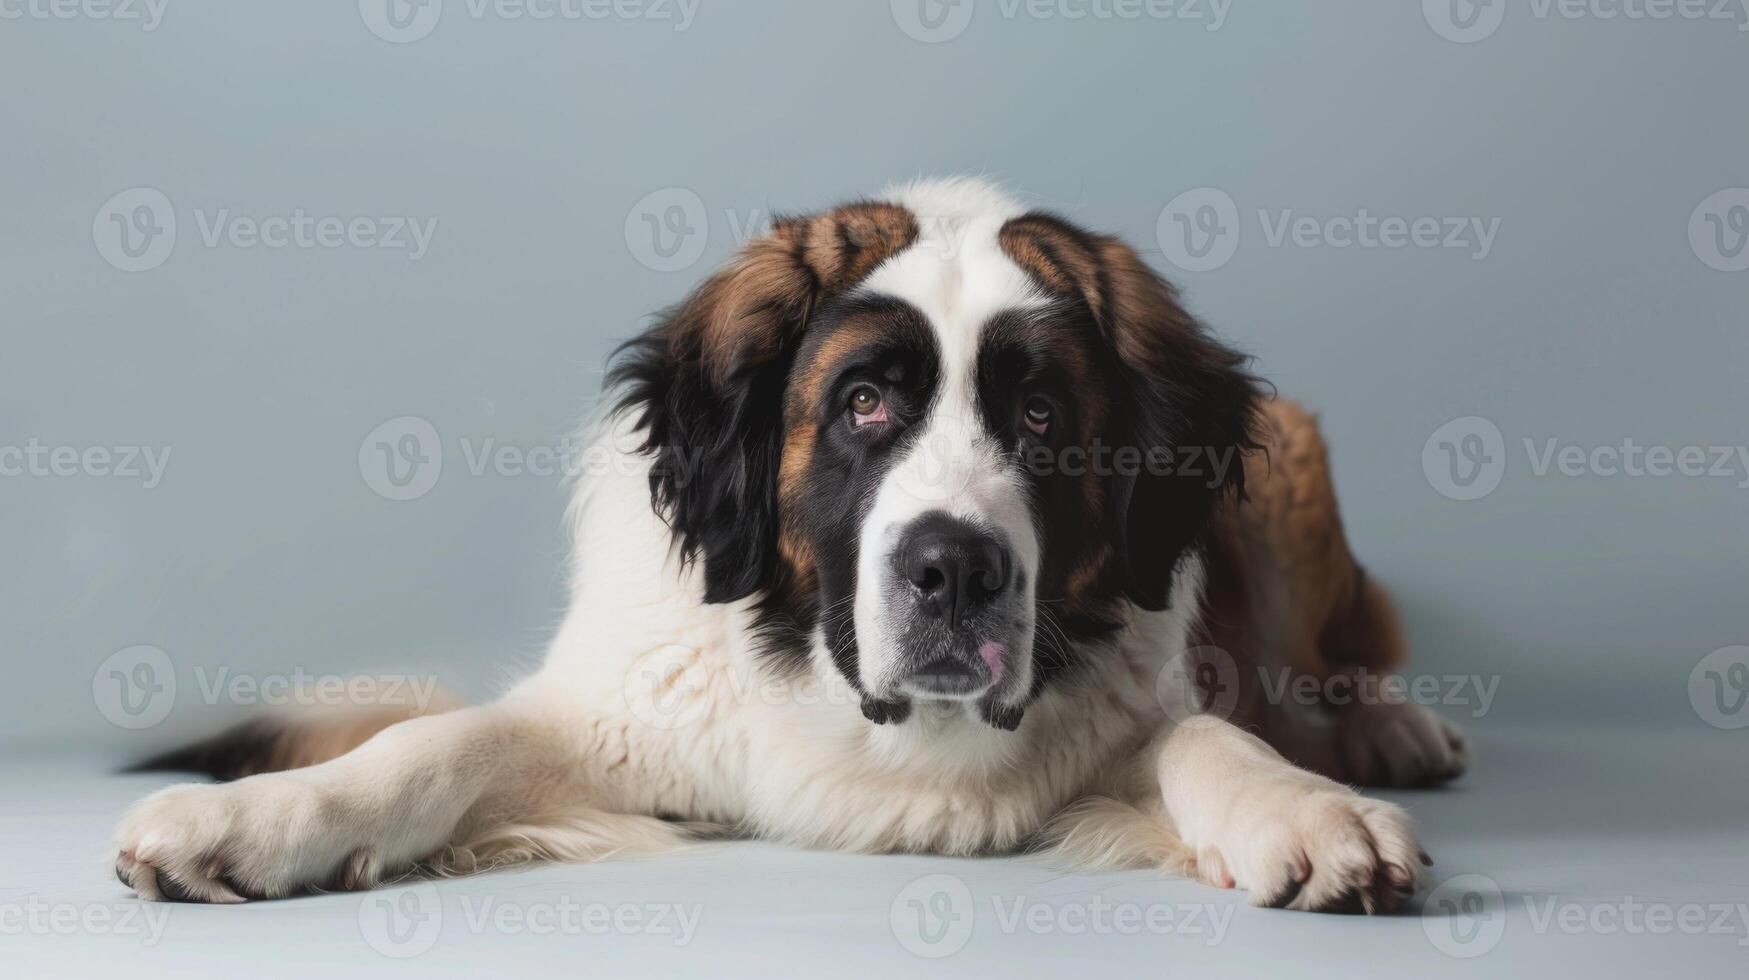 Saint Bernard dog portrait showcasing the large breed's fluffy and gentle nature with calm expressive eyes photo